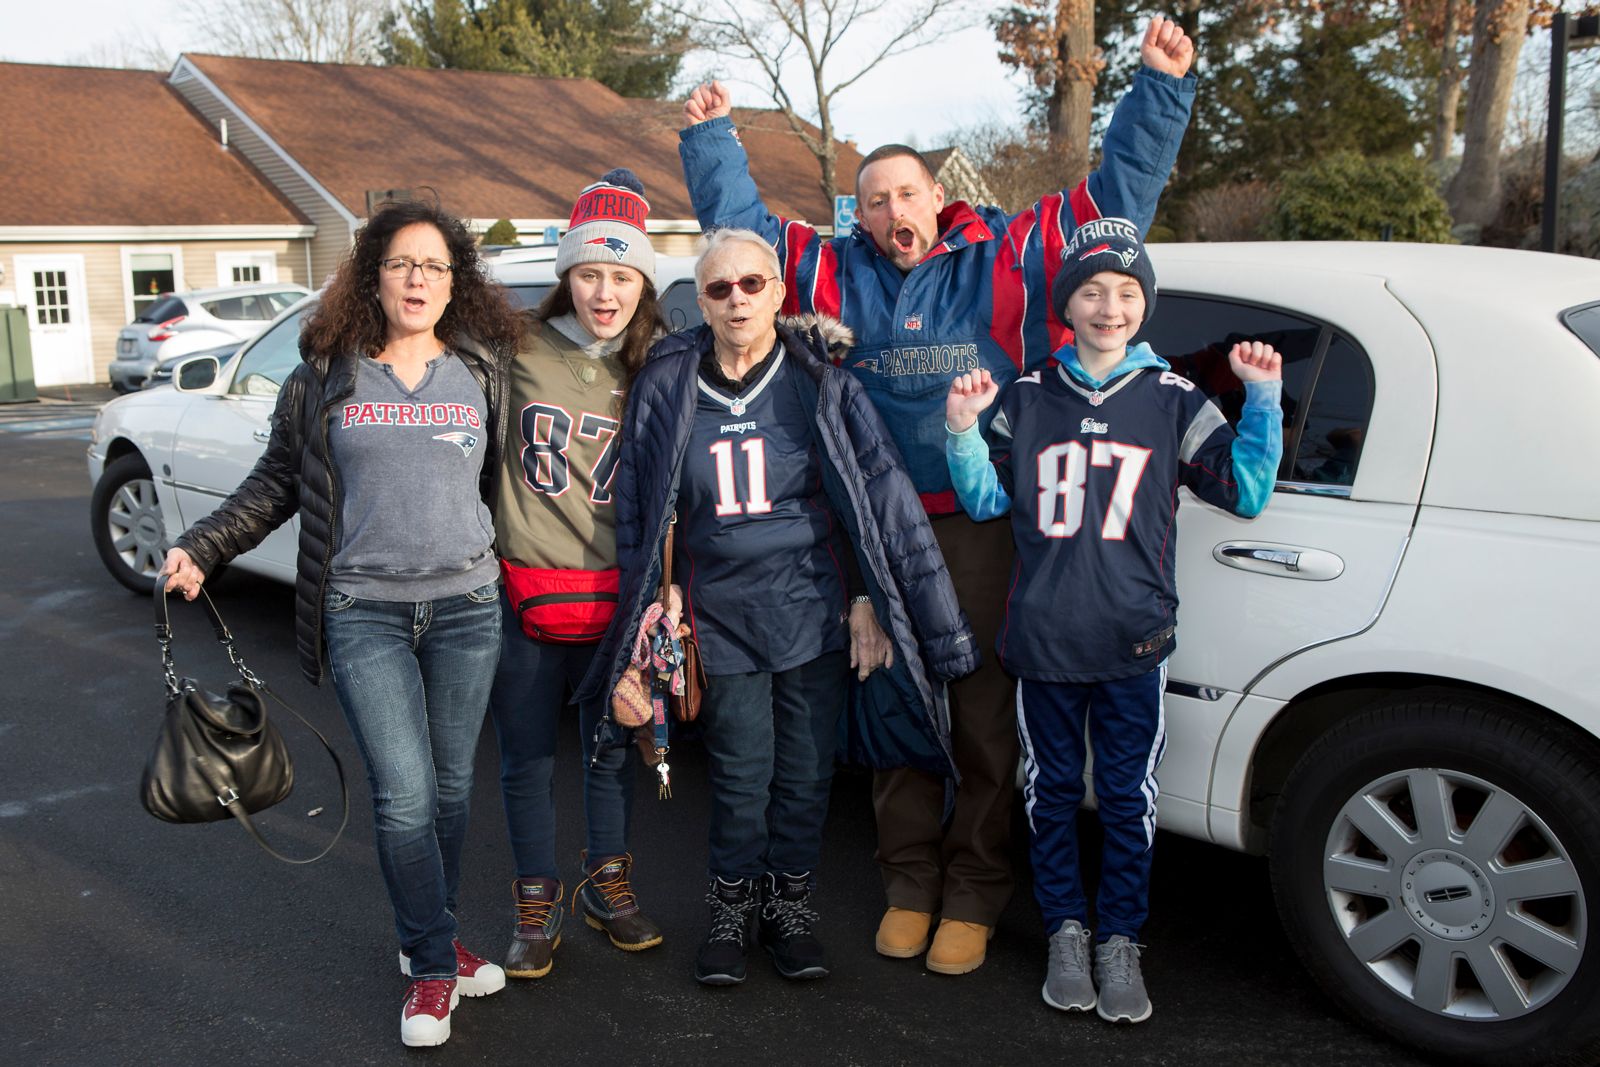 Attending A New England Patriots Game: A Hospice Patient’s Dream Come True